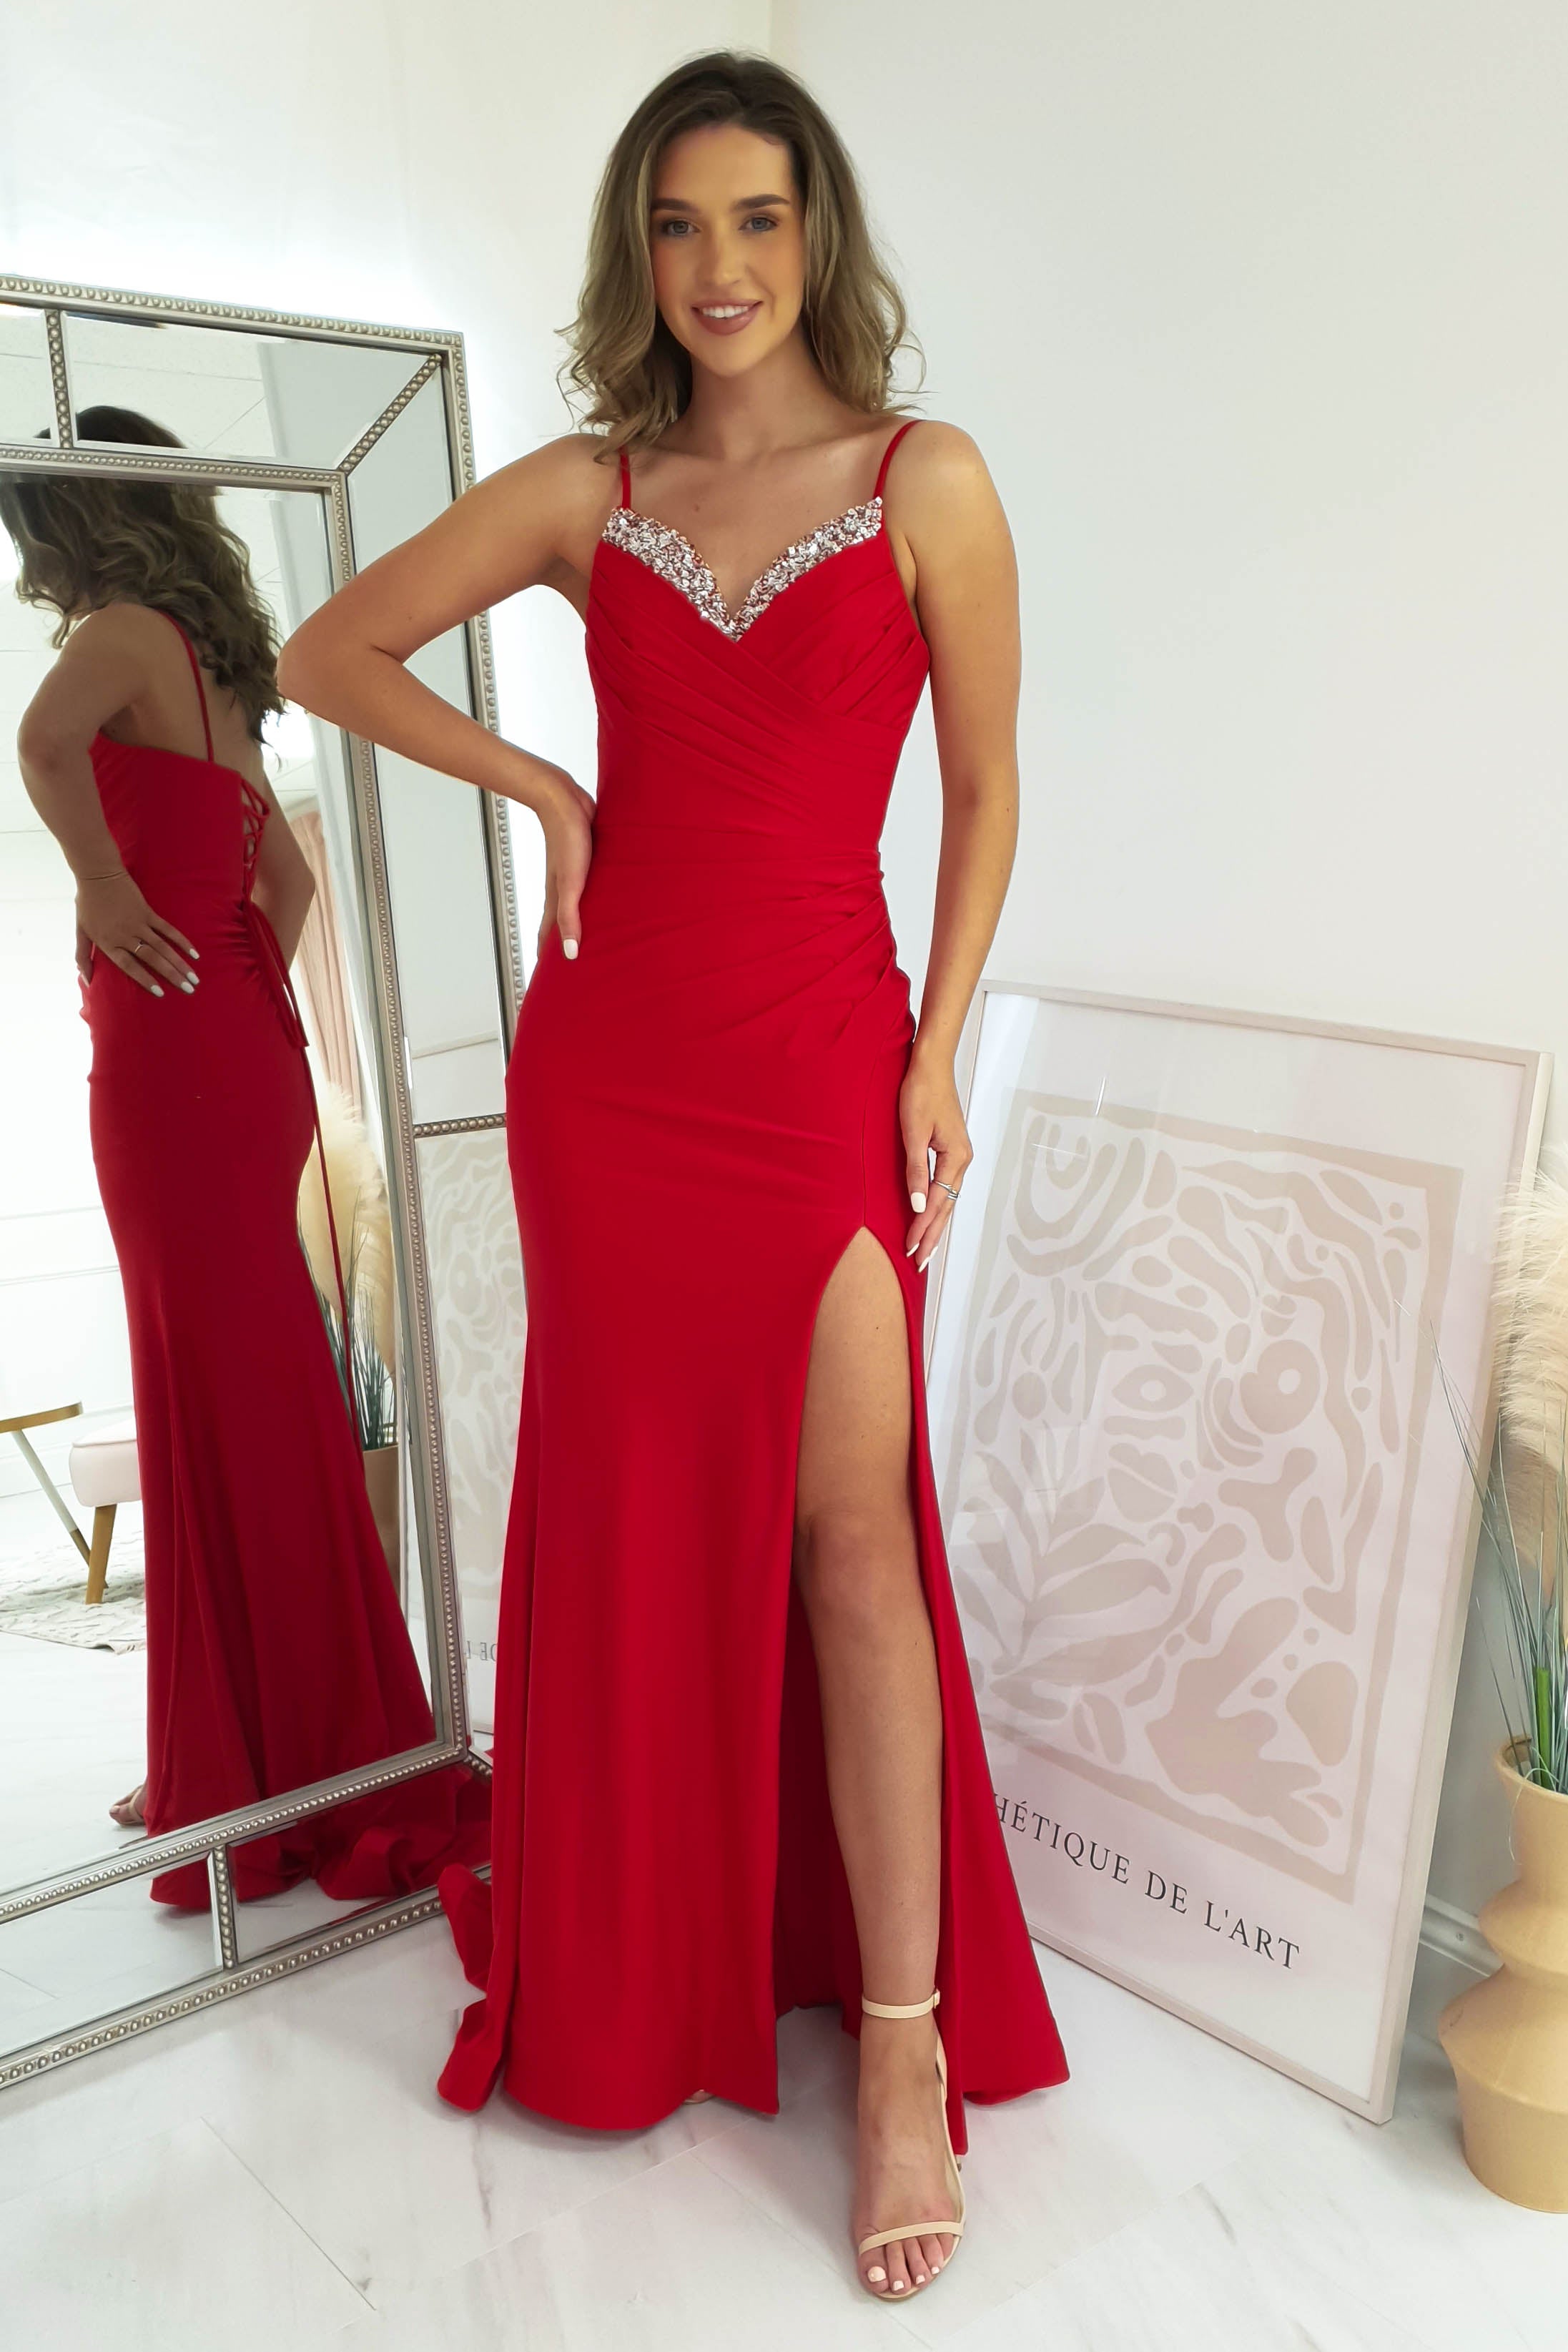 1-done-cd888-diamante-gown-red-cind-dresses-30753367785537.jpg